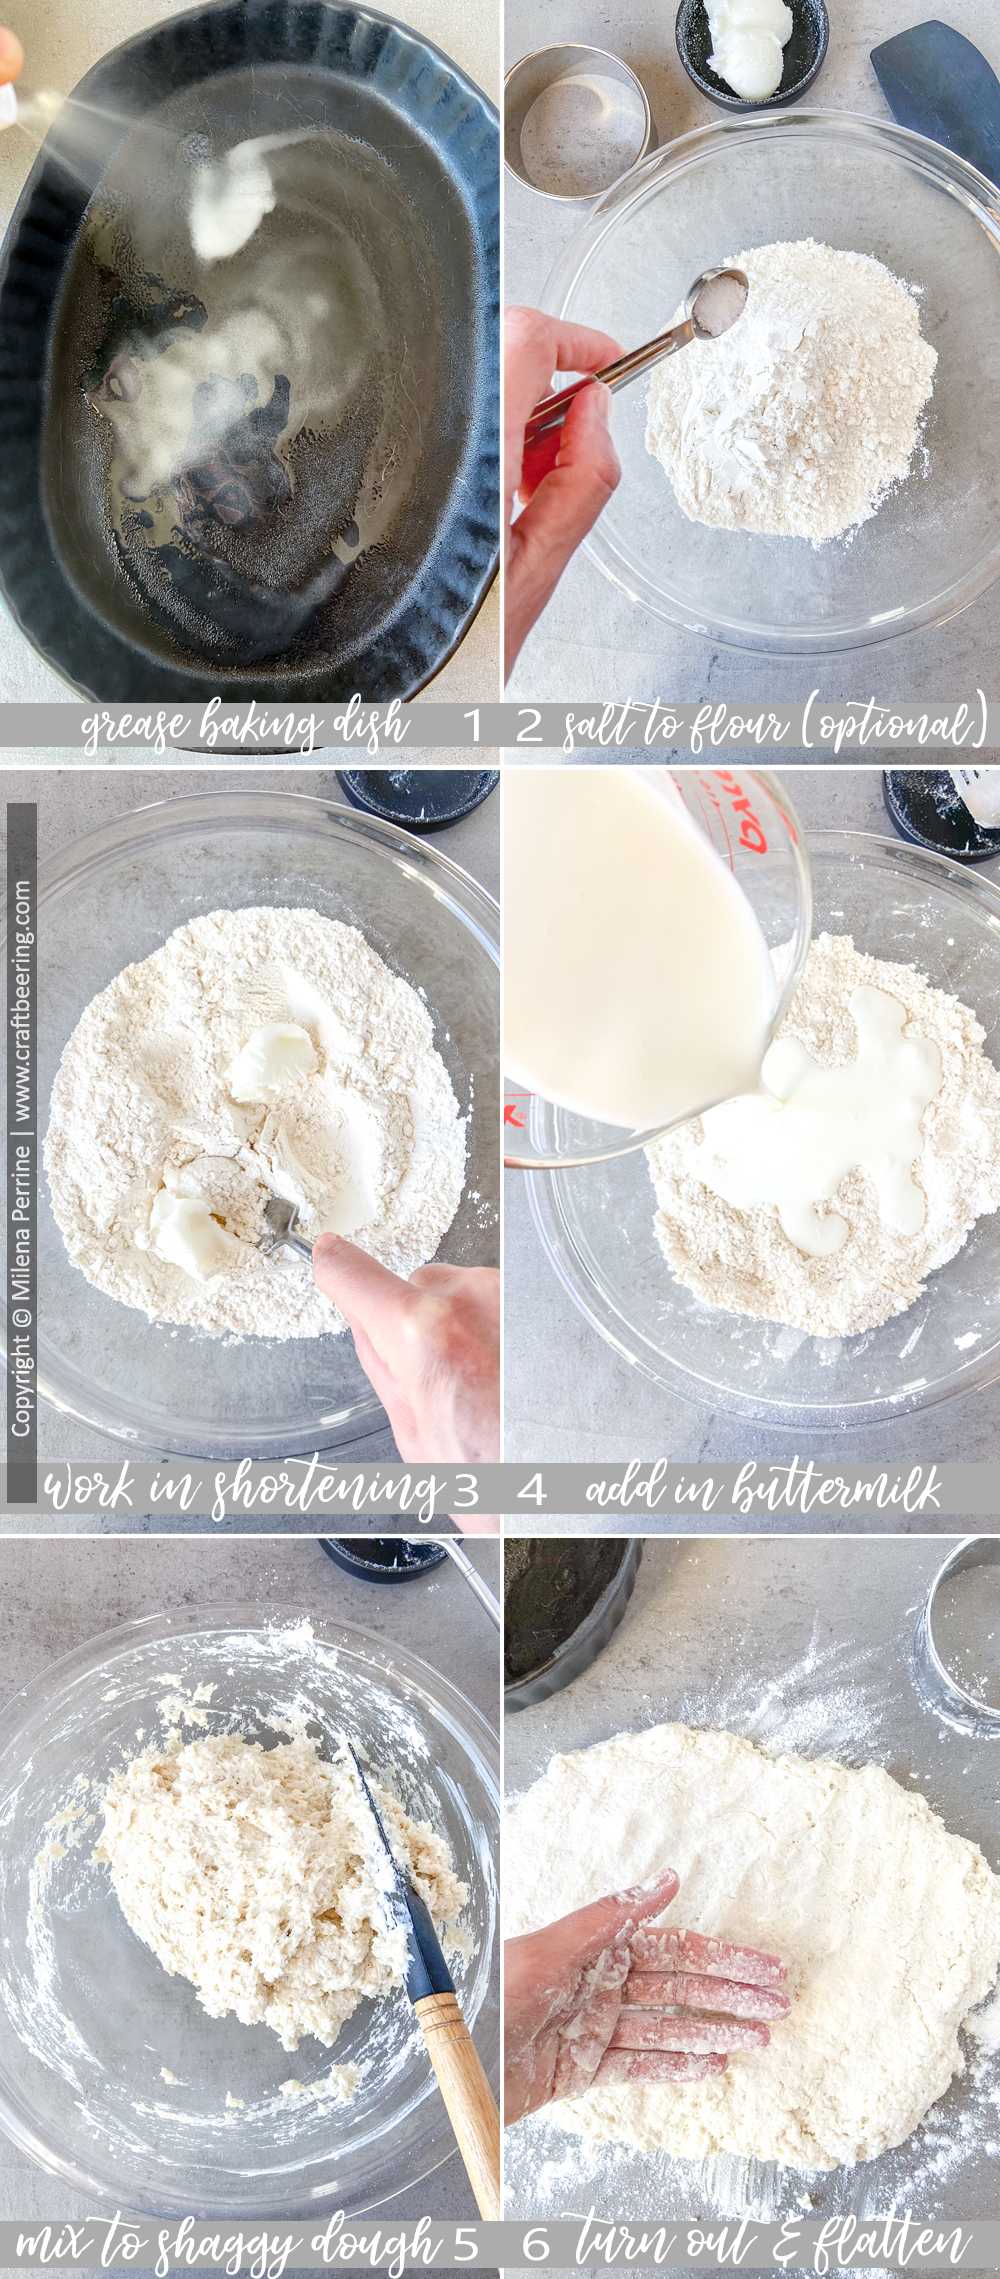 Step-by-step how to make cathead biscuits